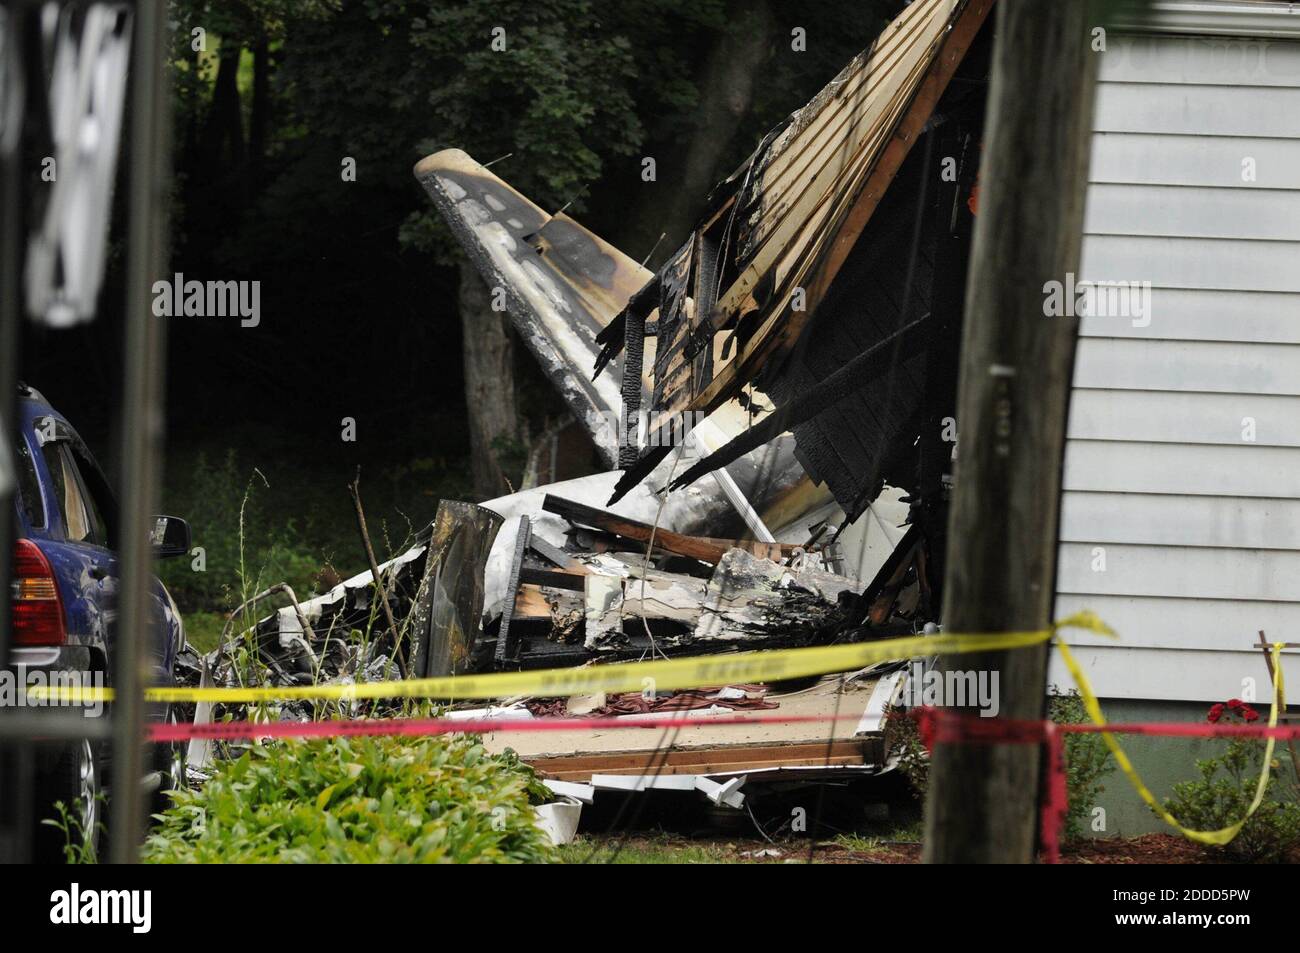 NO FILM, NO VIDEO, NO TV, NO DOCUMENTARY - The wreckage of a plane that crashed into two houses in East Haven, Connecticut, USA, Friday, August 9, 2013, is visible between the homes. Photo by Cloe Poisson/Hartford Courant/MCT/ABACAPRESS.COM Stock Photo